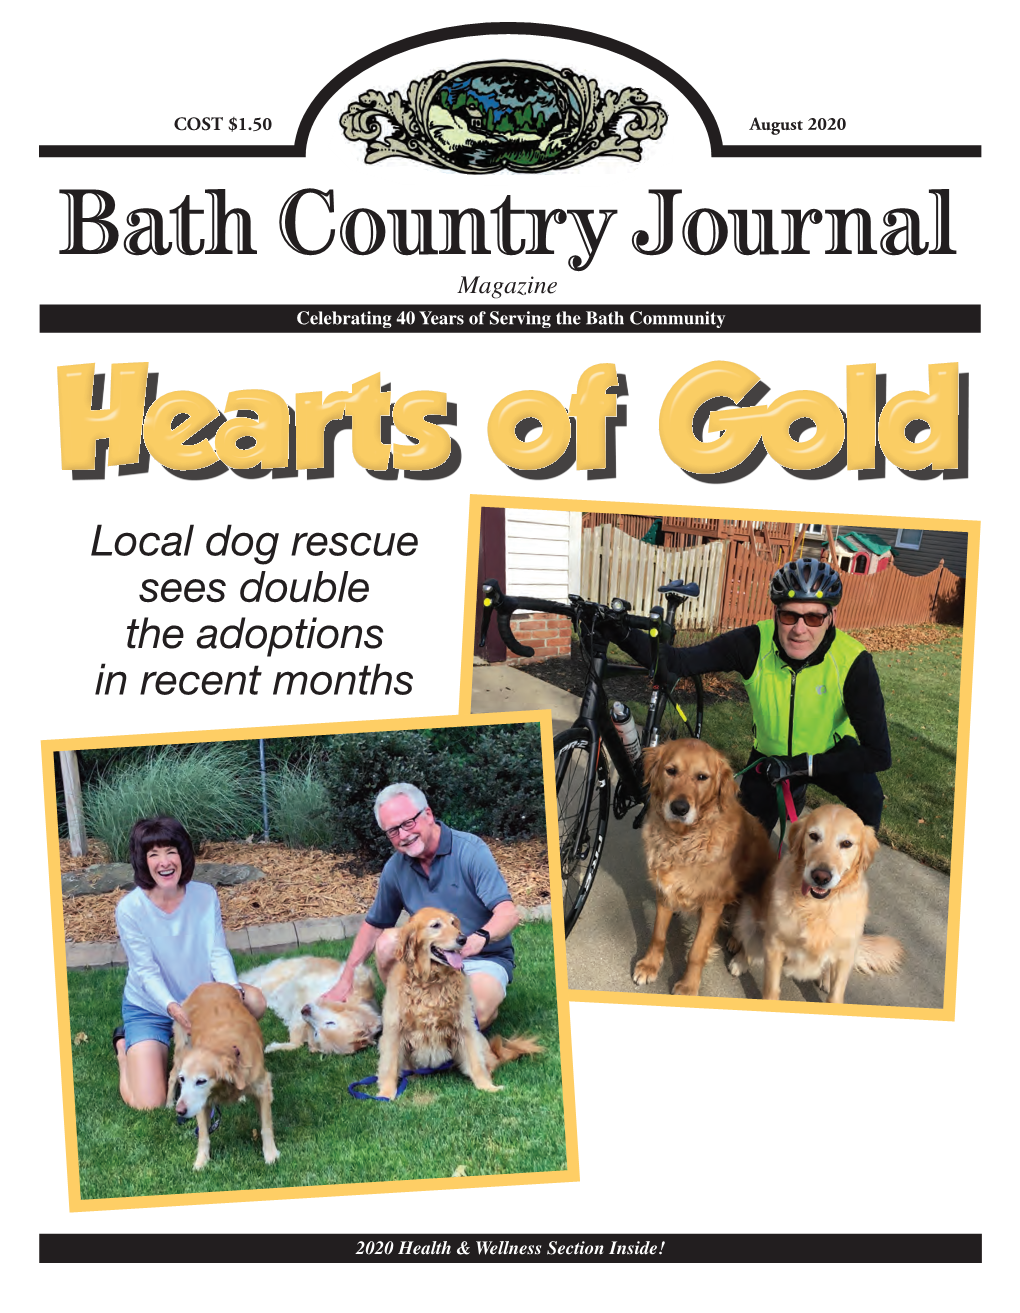 Bath Country Journal Magazine Celebrating 2840 Years of Serving the Bath Community Hearts of Gold Local Dog Rescue Sees Double the Adoptions in Recent Months